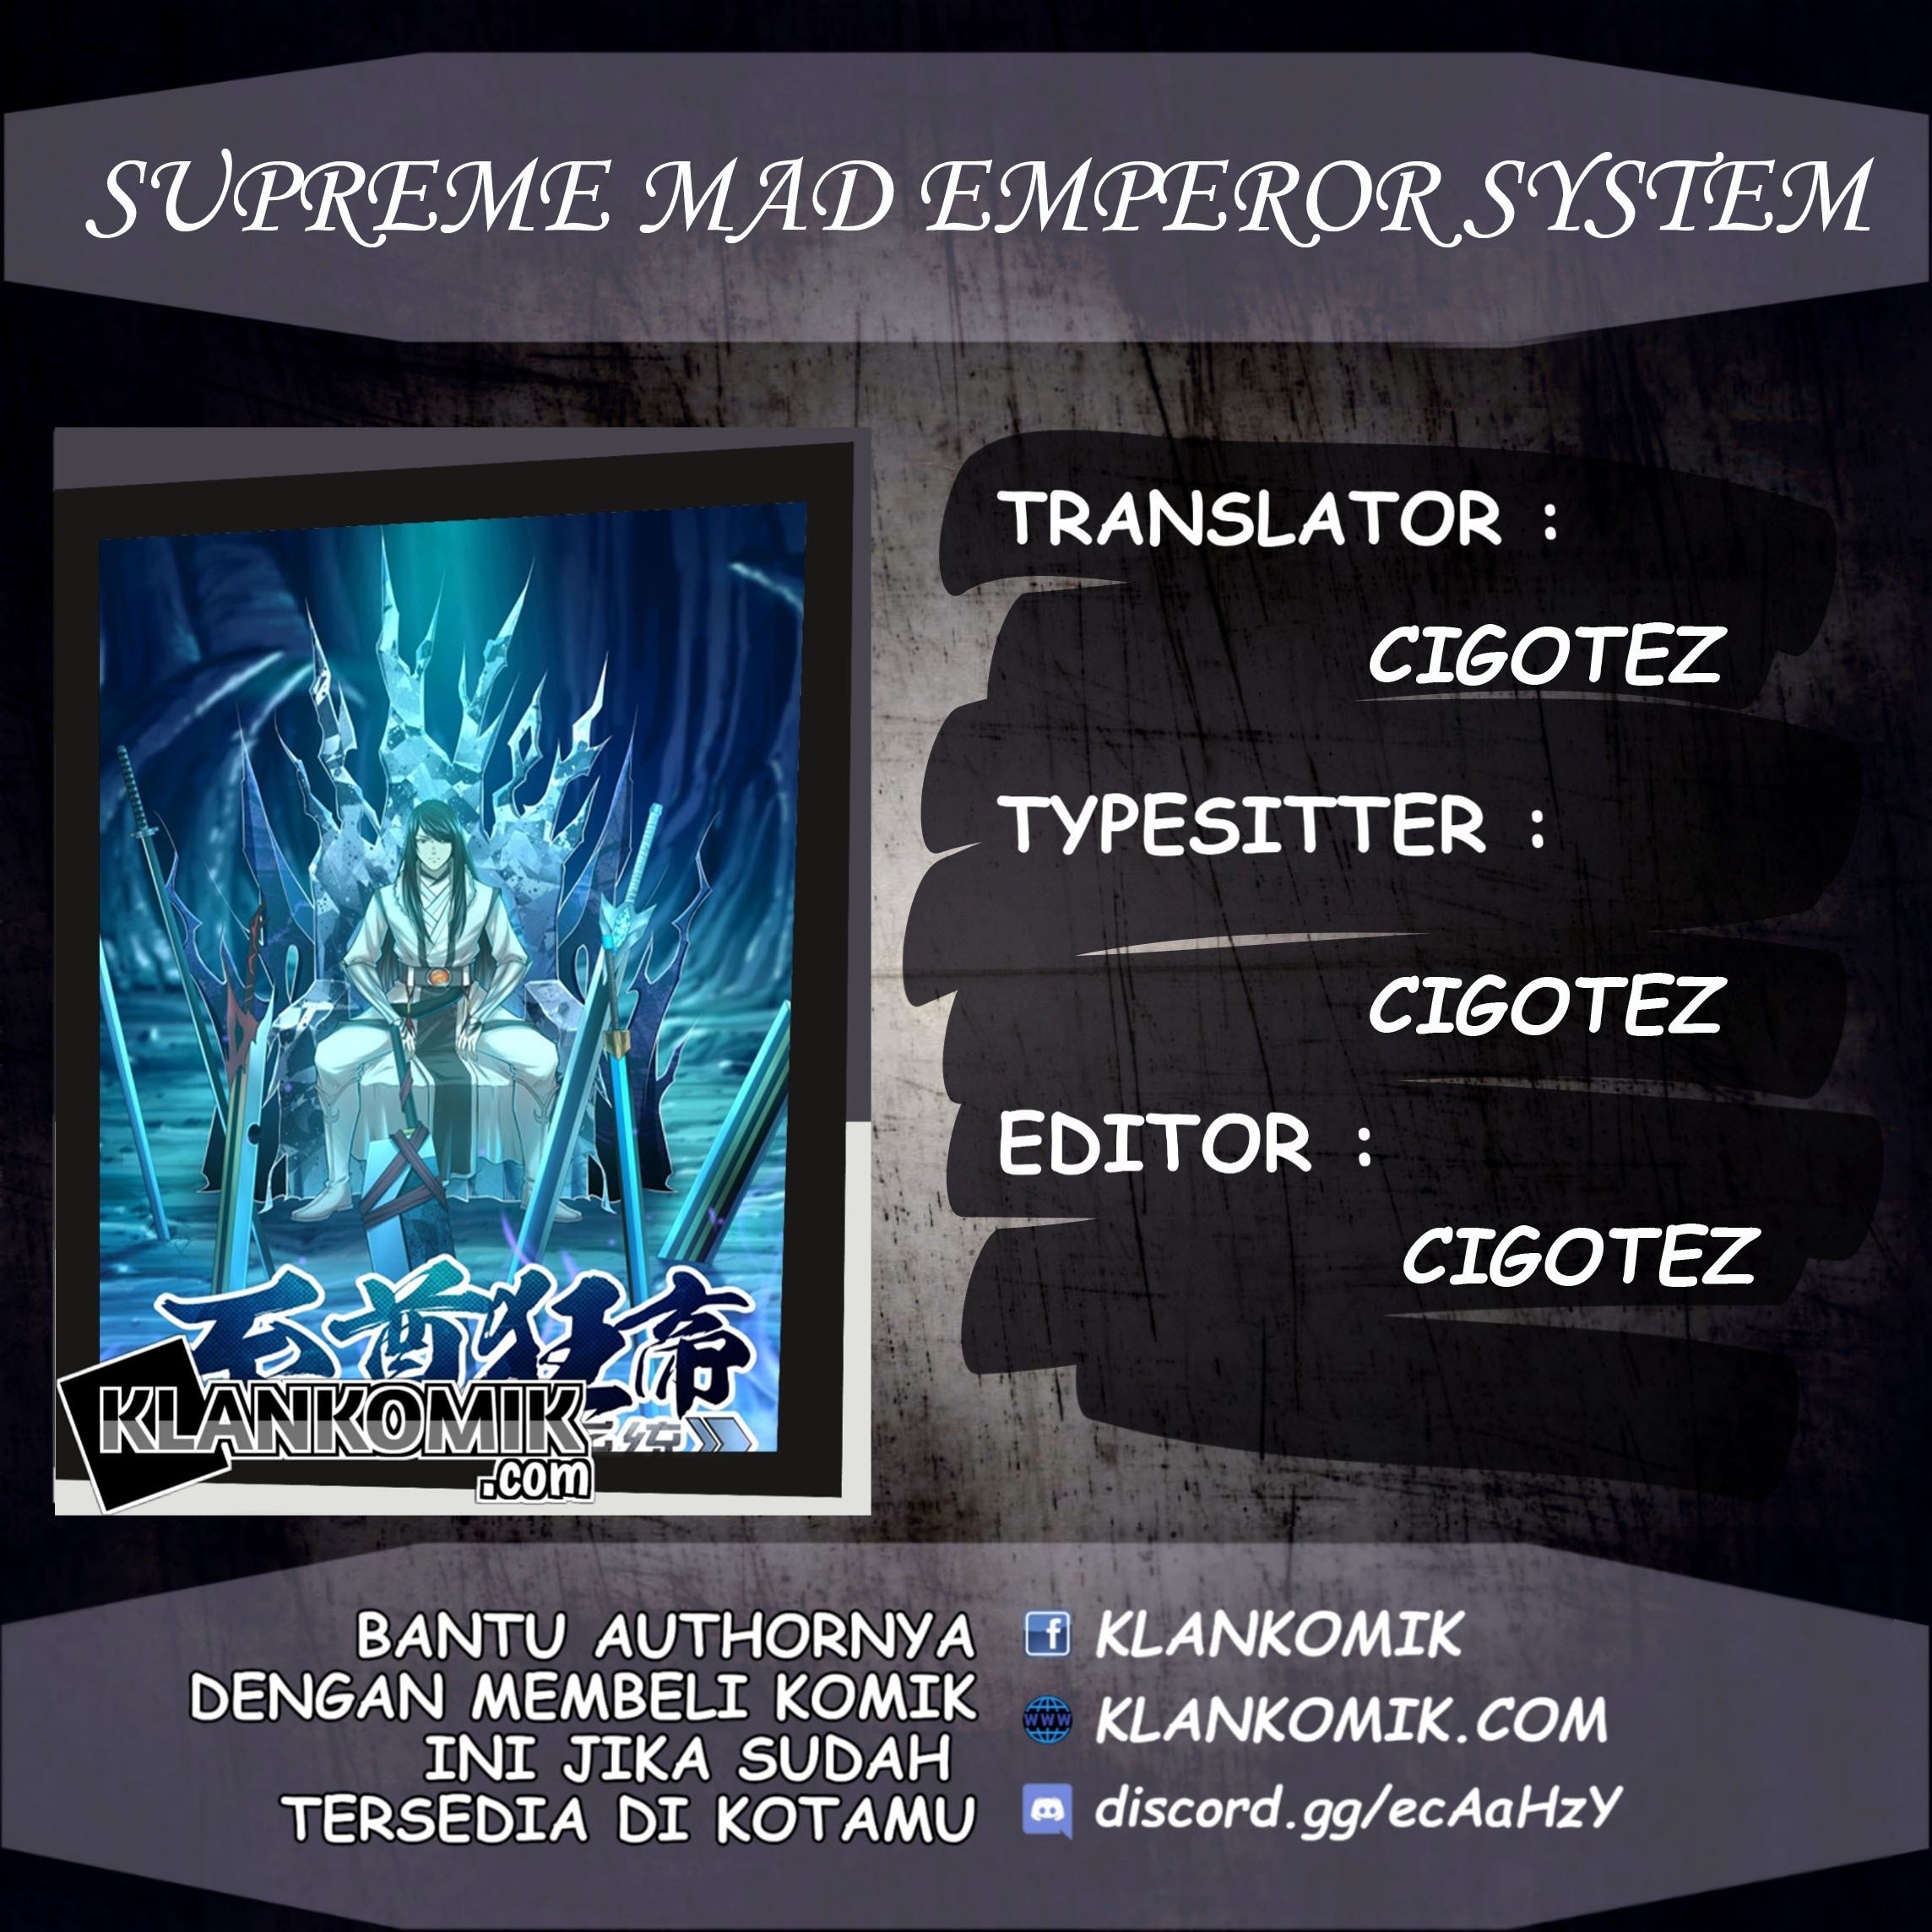 Extreme Mad Emperor System (Supreme Mad Emperor System) Chapter 19